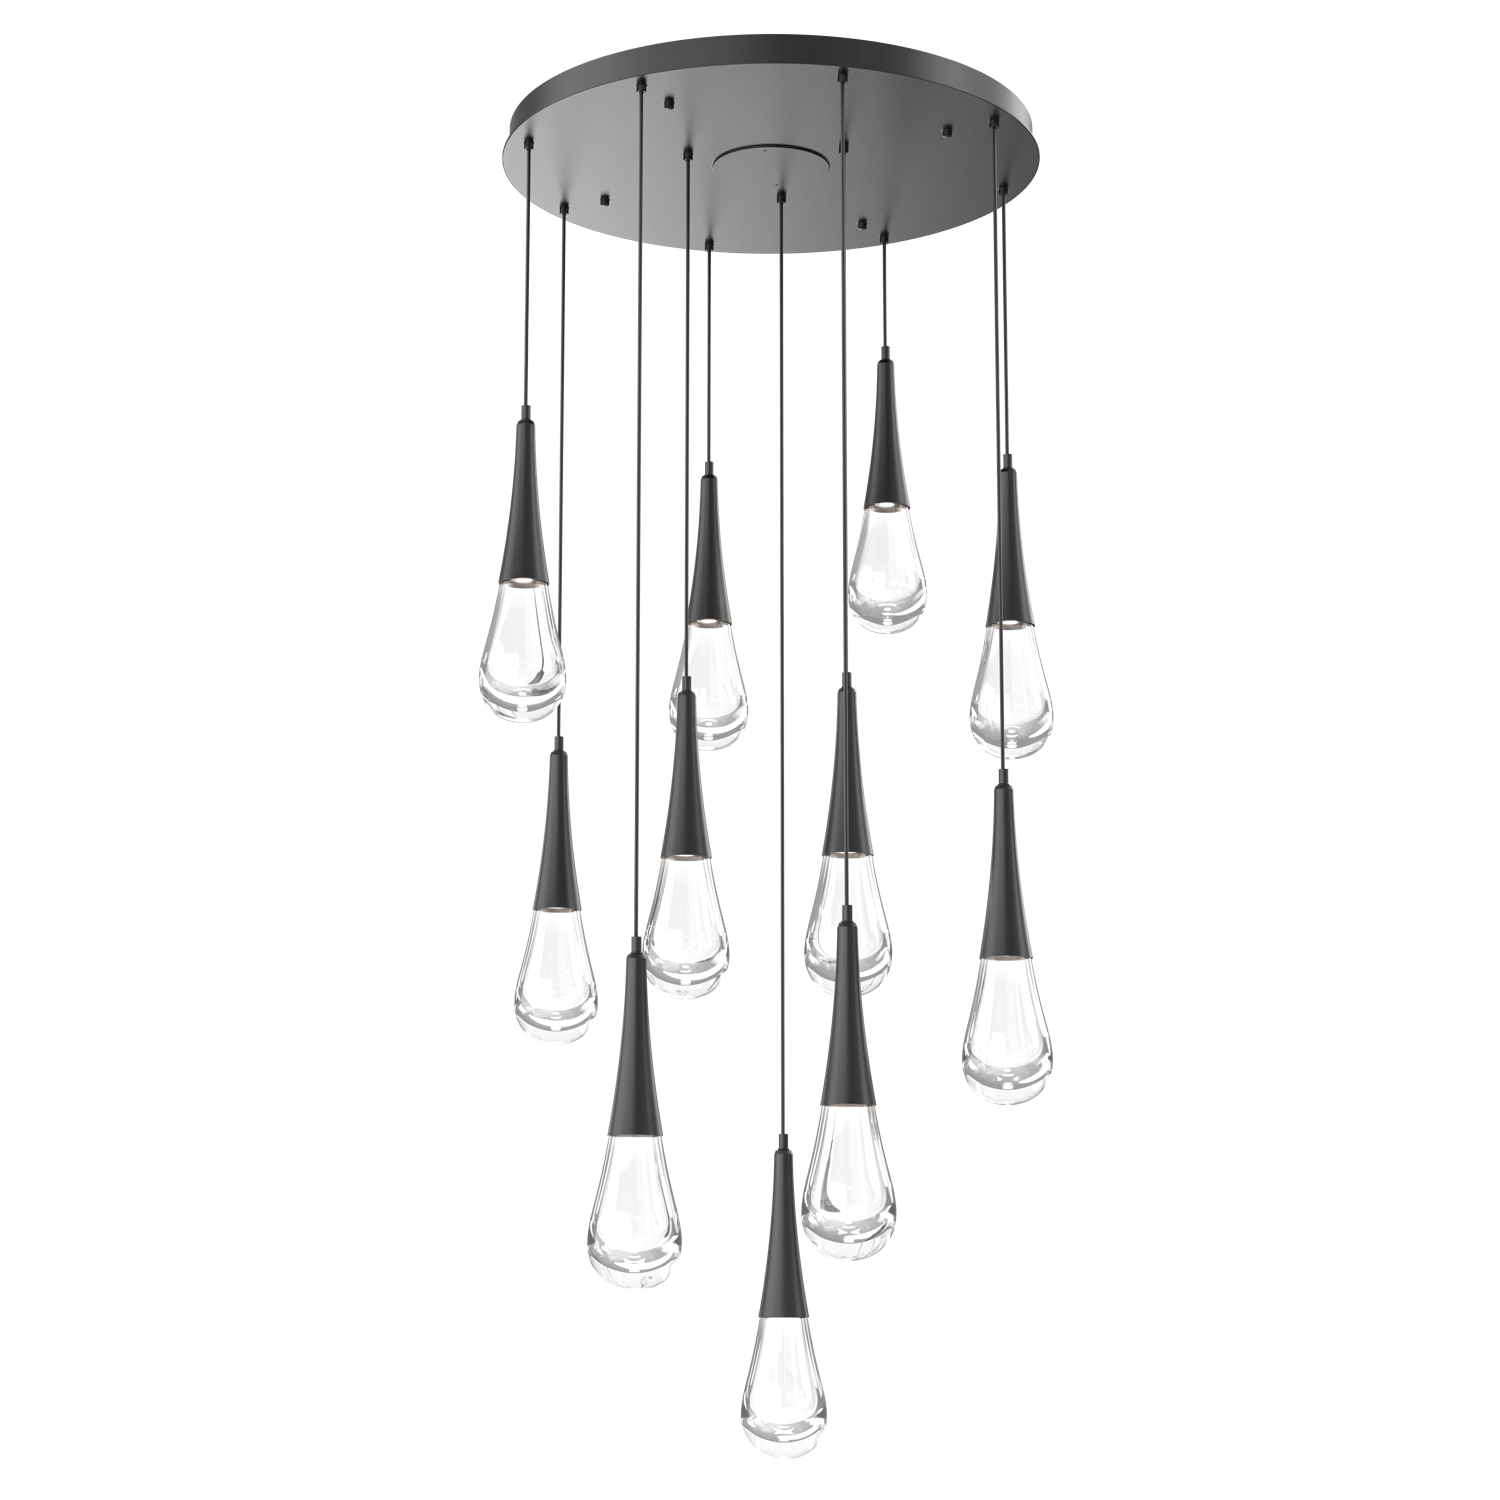 CHB0078-11-MB-Hammerton-Studio-Raindrop-11-light-round-pendant-chandelier-with-matte-black-finish-and-clear-blown-glass-shades-and-LED-lamping